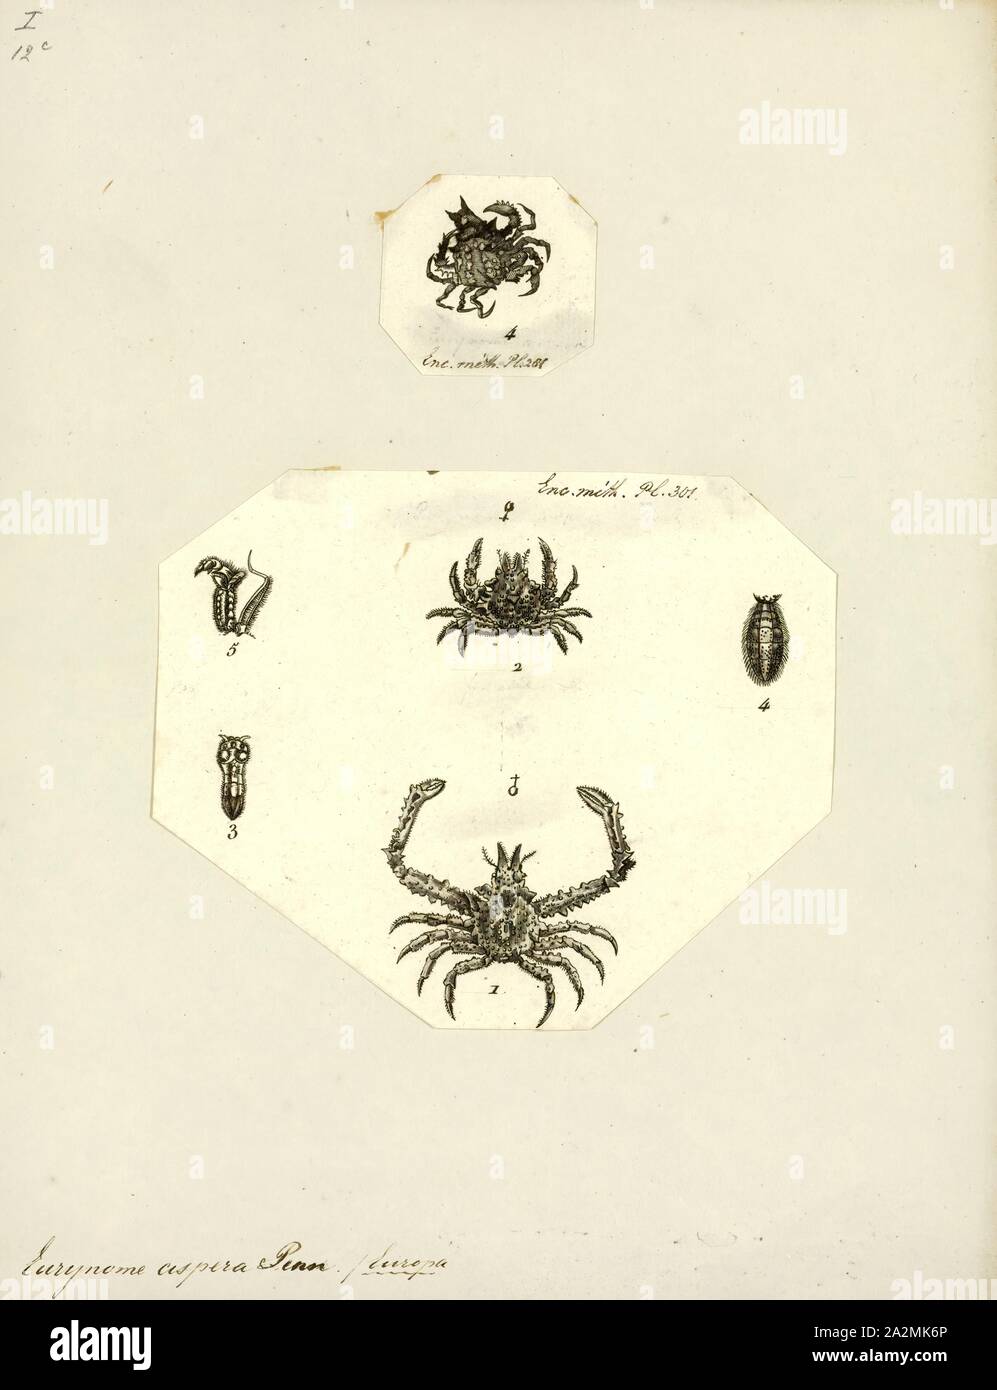 Eurynome aspera, Print, Eurynome aspera, the strawberry crab, is a species of crab in the family Majidae.It is small (1–2 cm) and sometimes a vague strawberry colour.The carapace and legs are often encrusted with algae and mud which act as camouflage Stock Photo